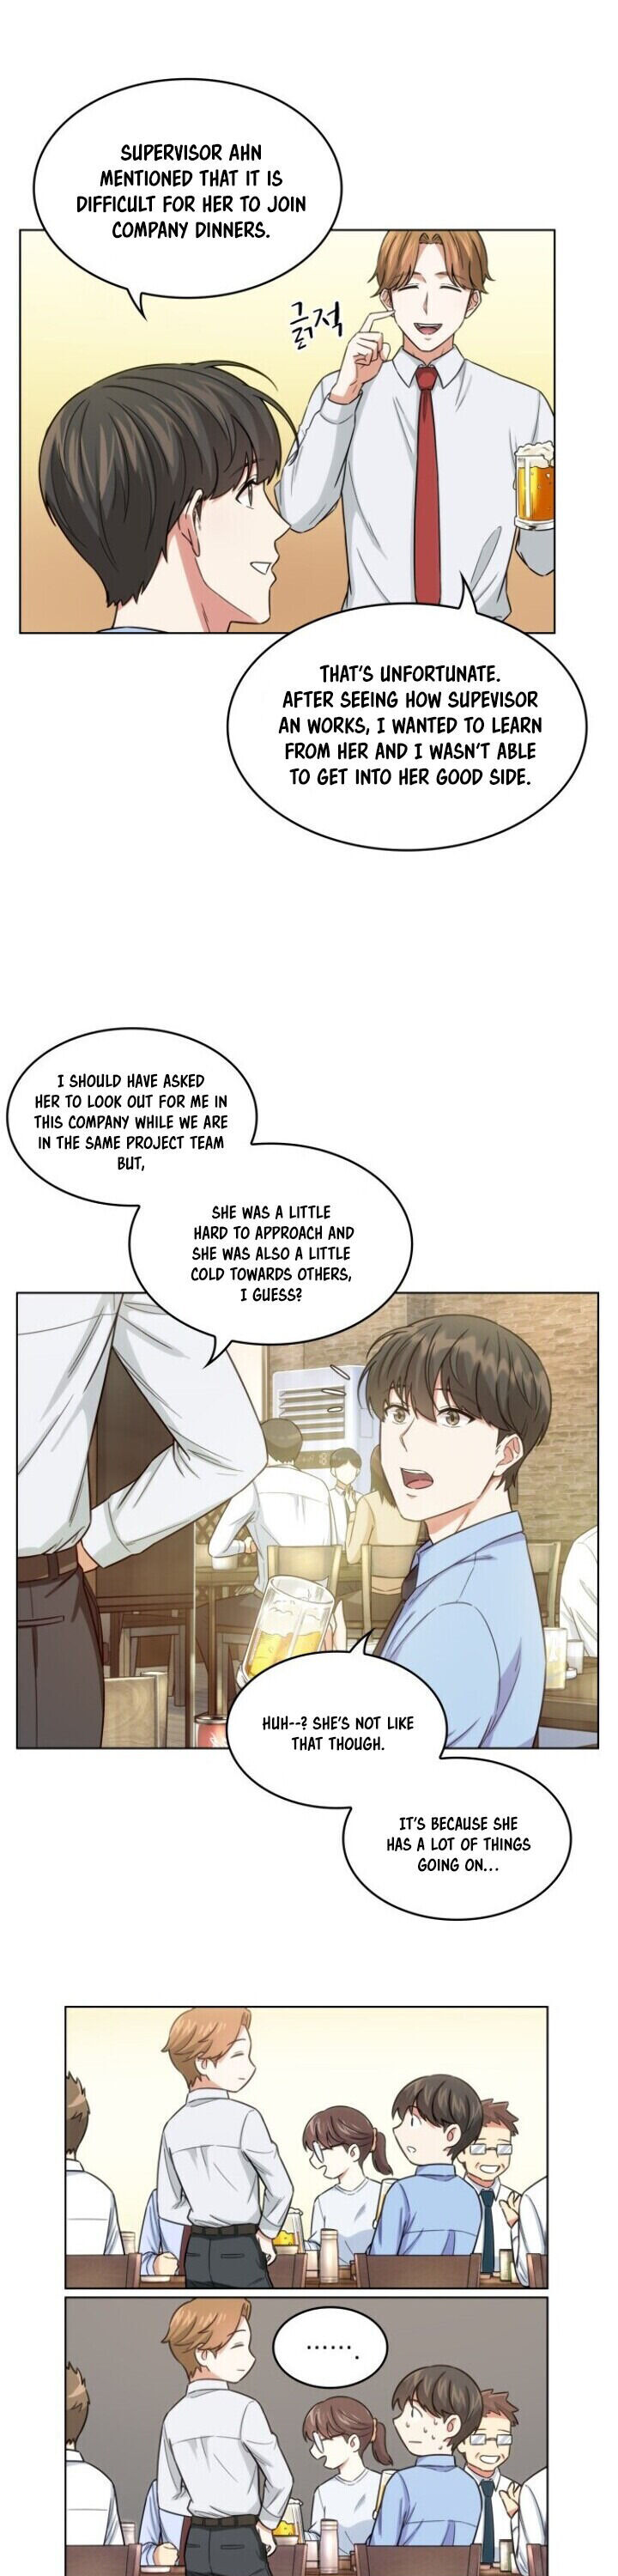 My Office Noona’s Story - Chapter 11 Page 4